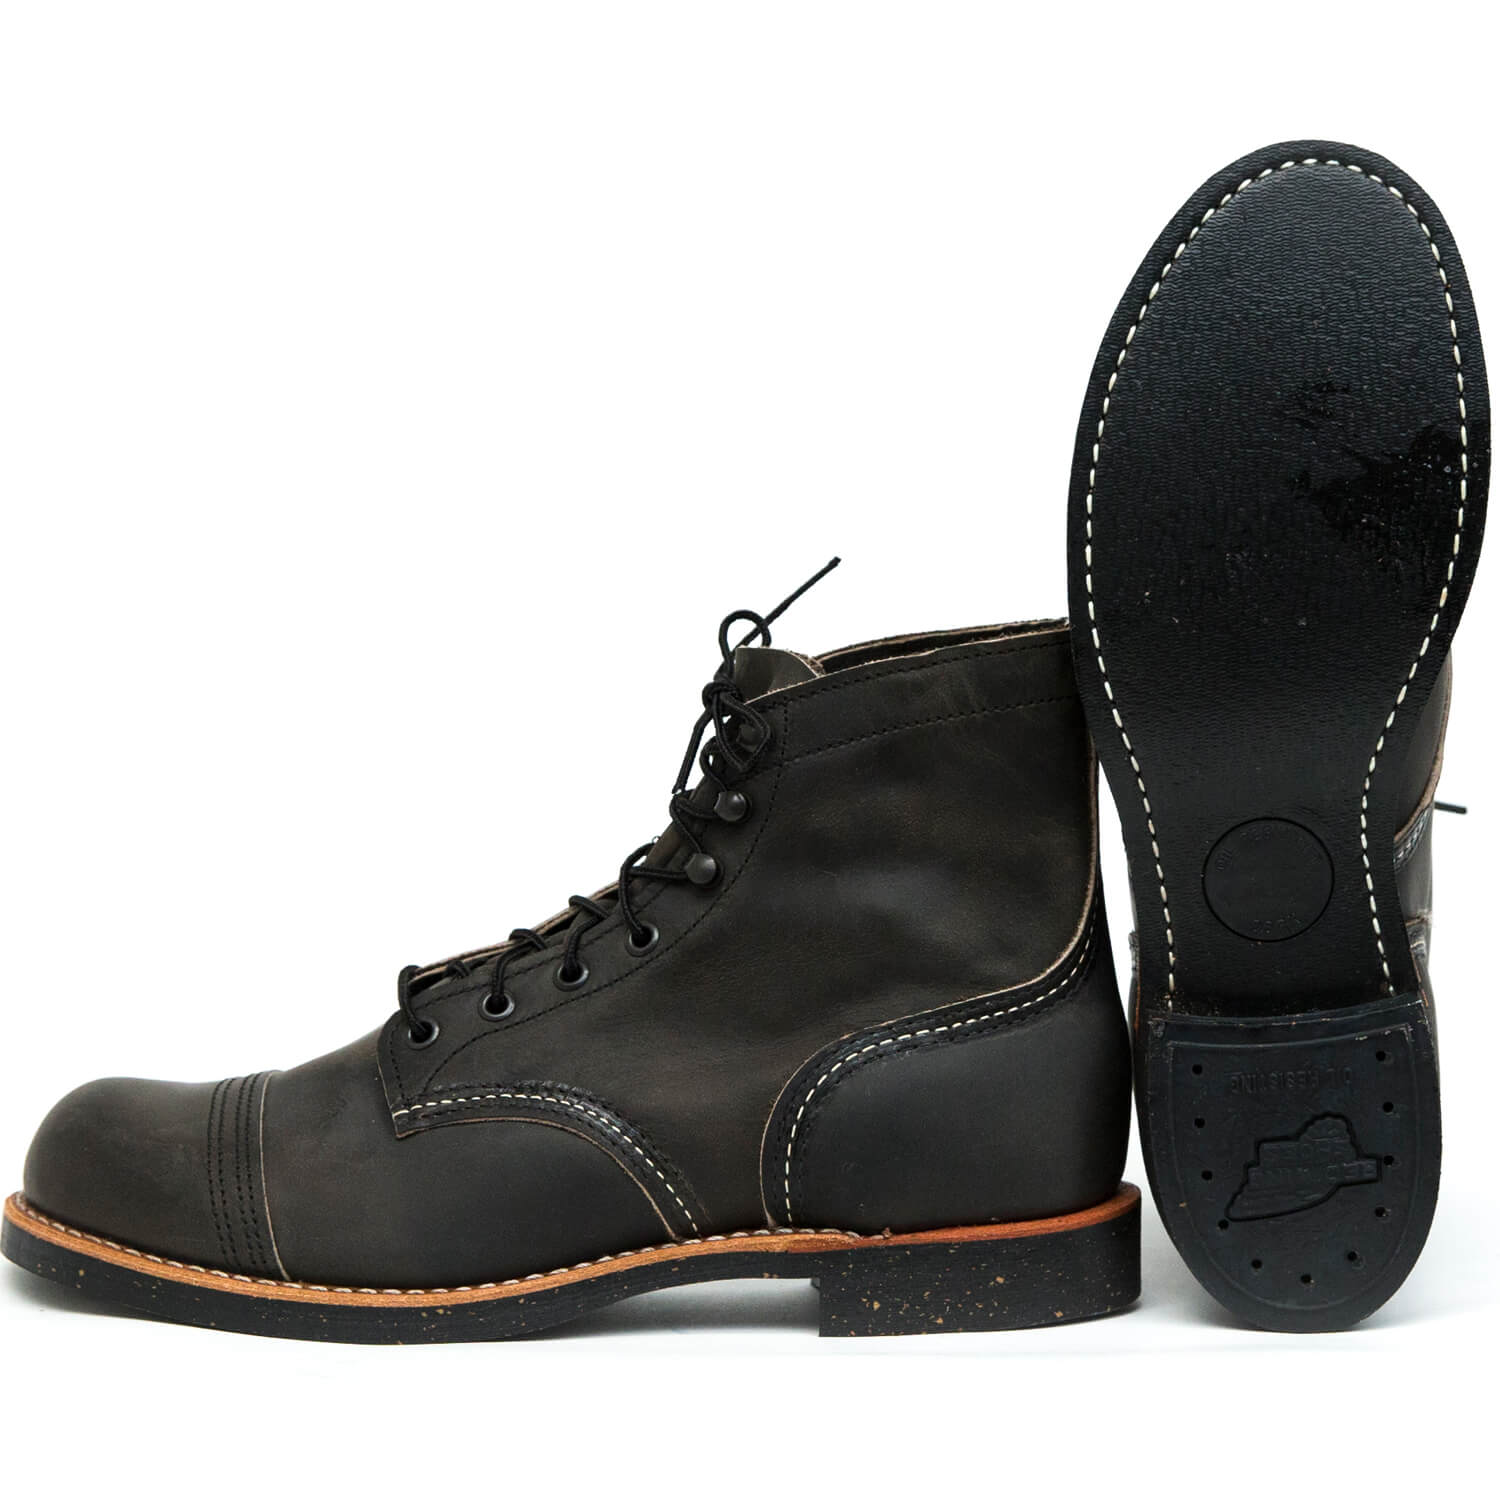 8086 Iron Ranger Charcoal Rough & Tough – Red Wing